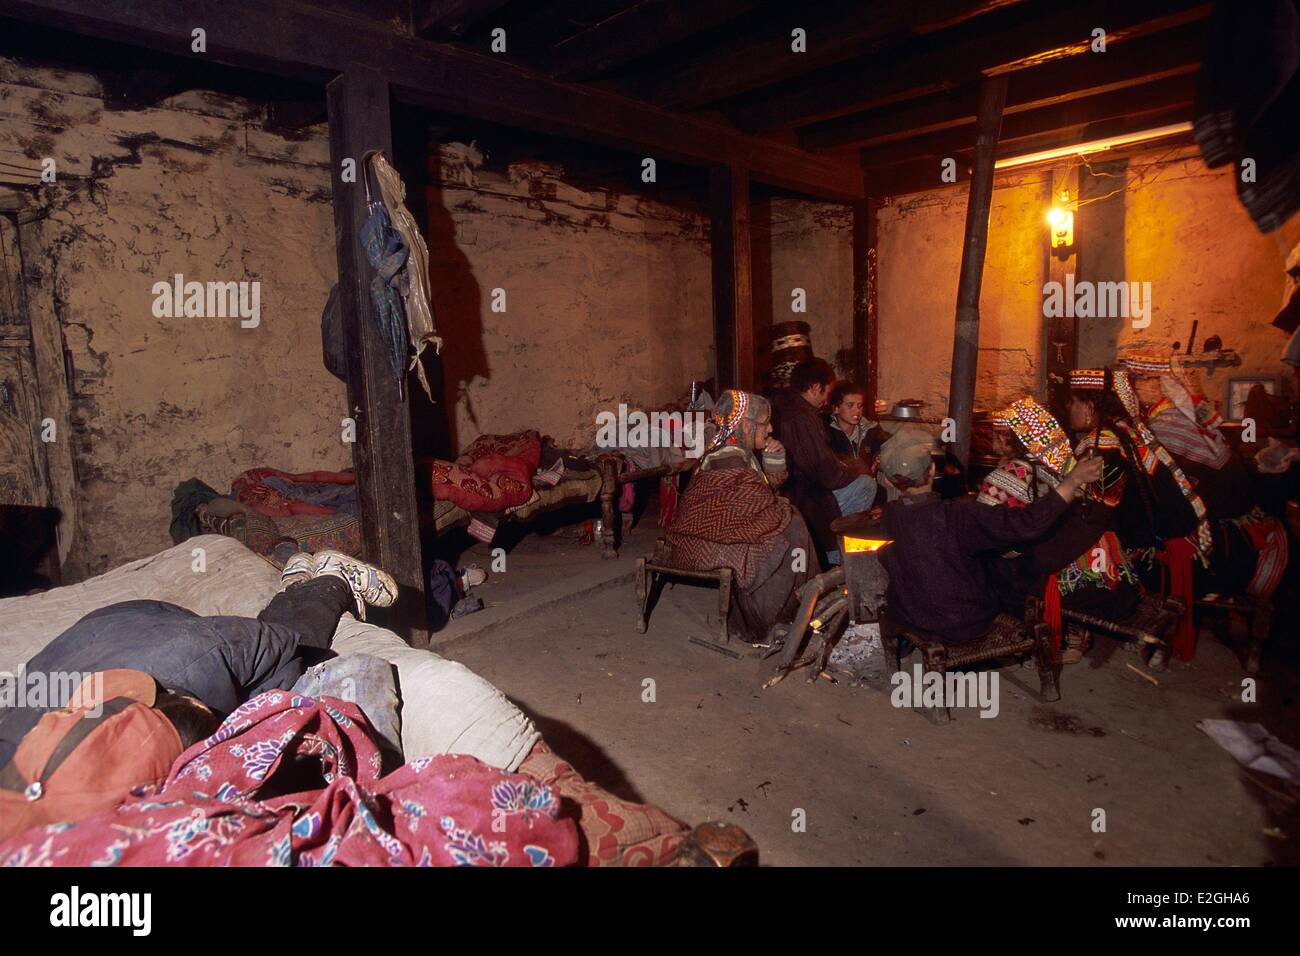 Pakistan Khyber Pakhtunkhwa Kalash valleys Bumburet valley children sleeping on beds that surround single room of Kalash houses while rest of family is seat around stove earthen floor wood stone and wattle and daub walls Stock Photo